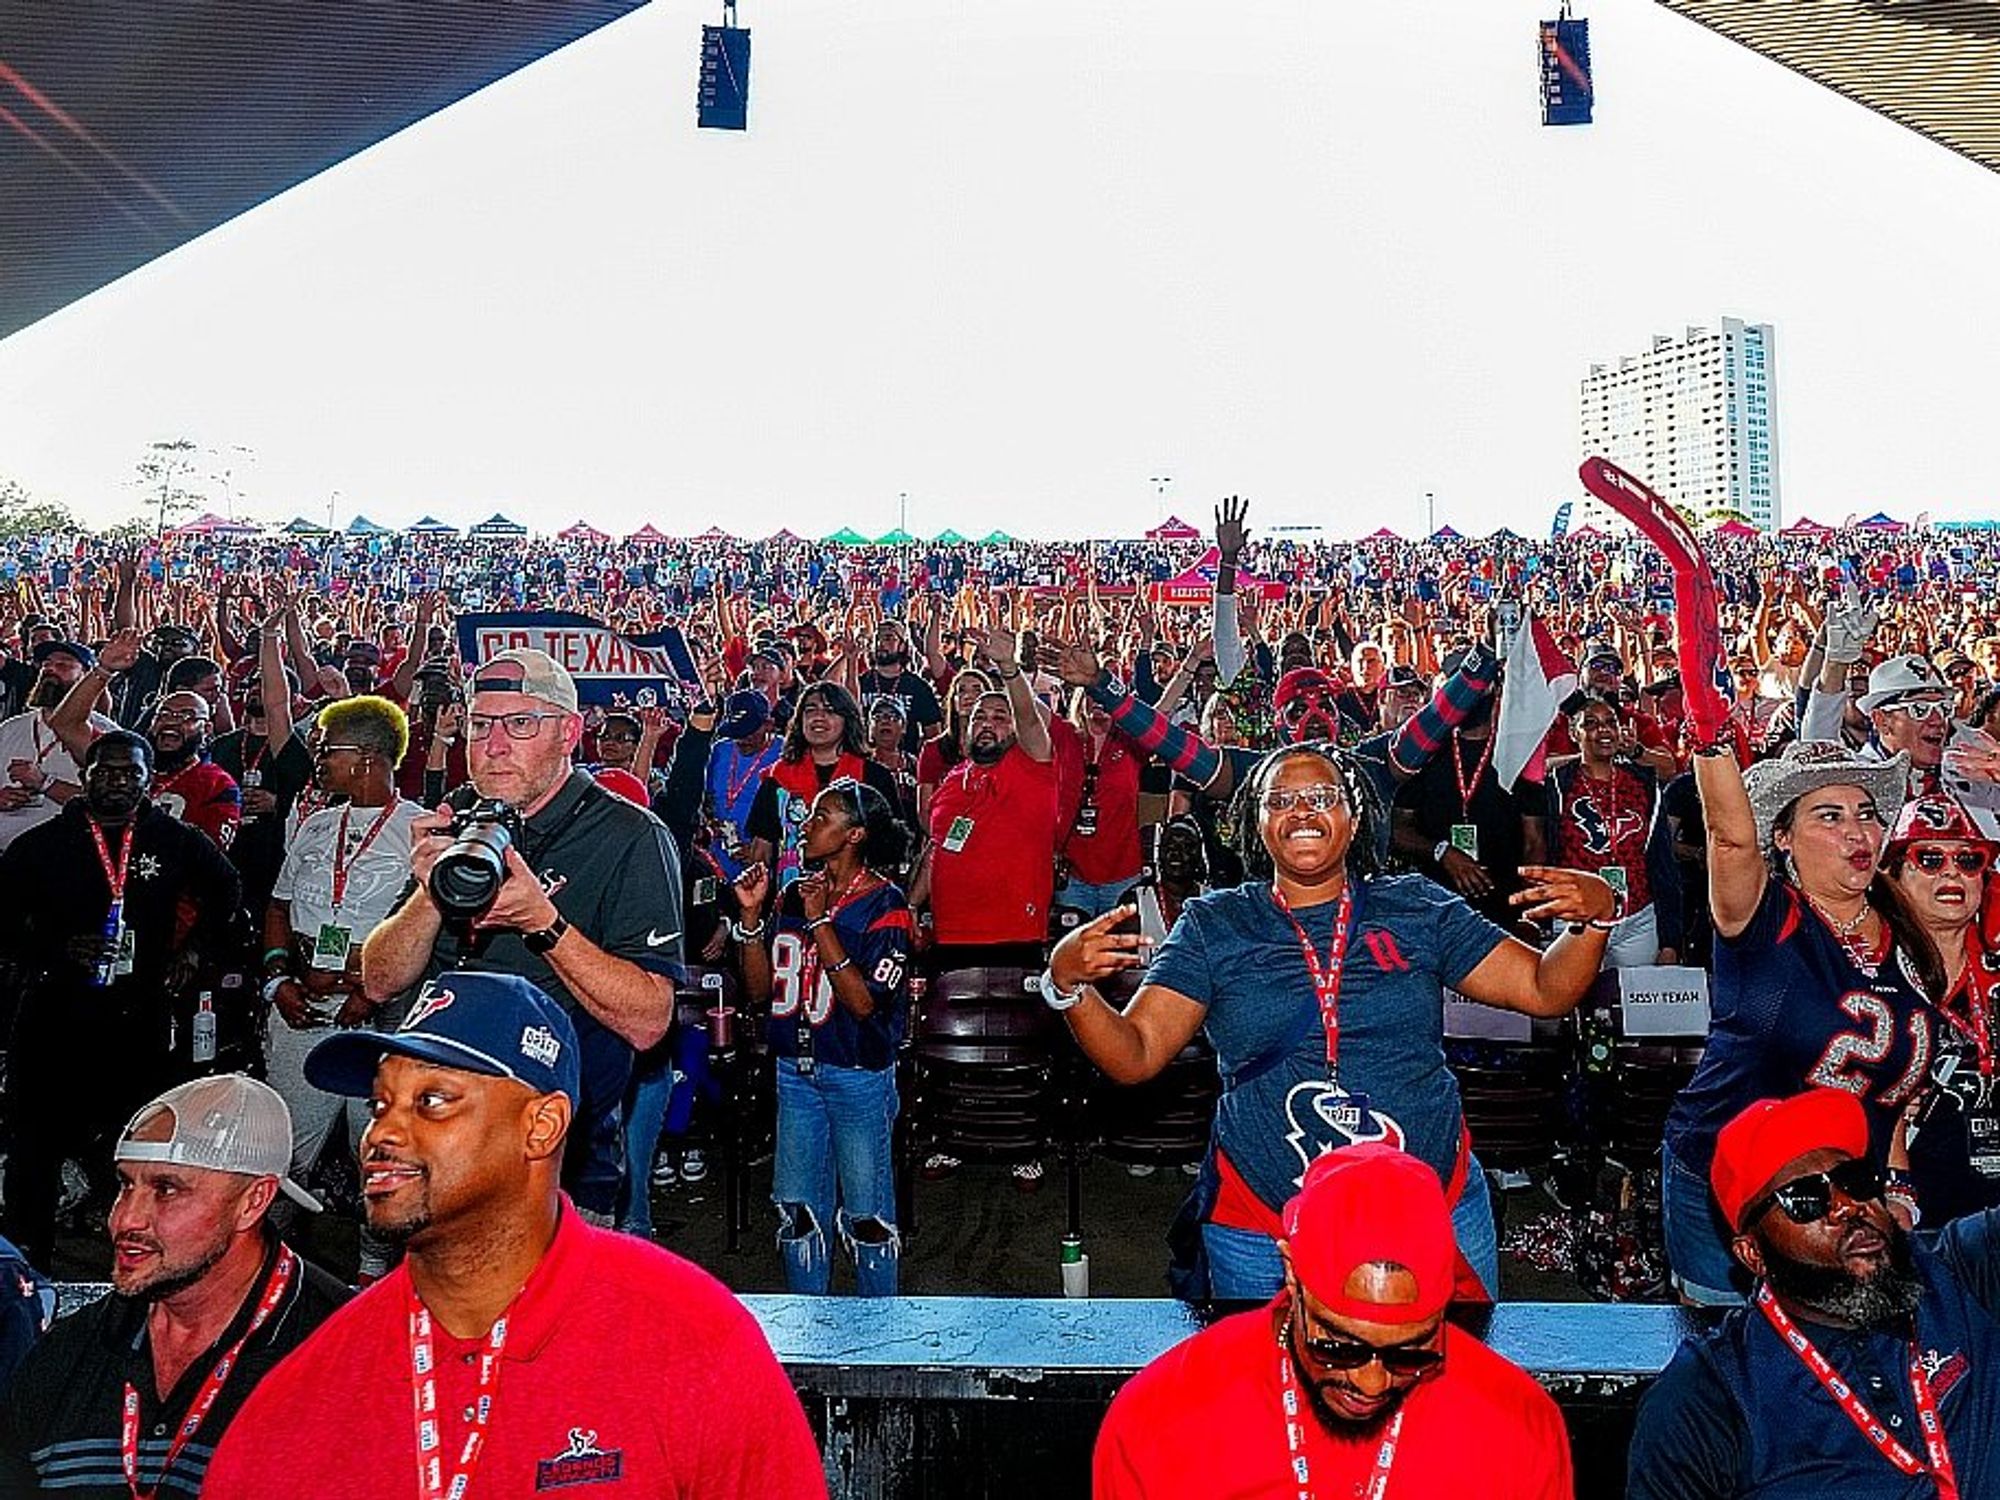 Houston Texans watch party